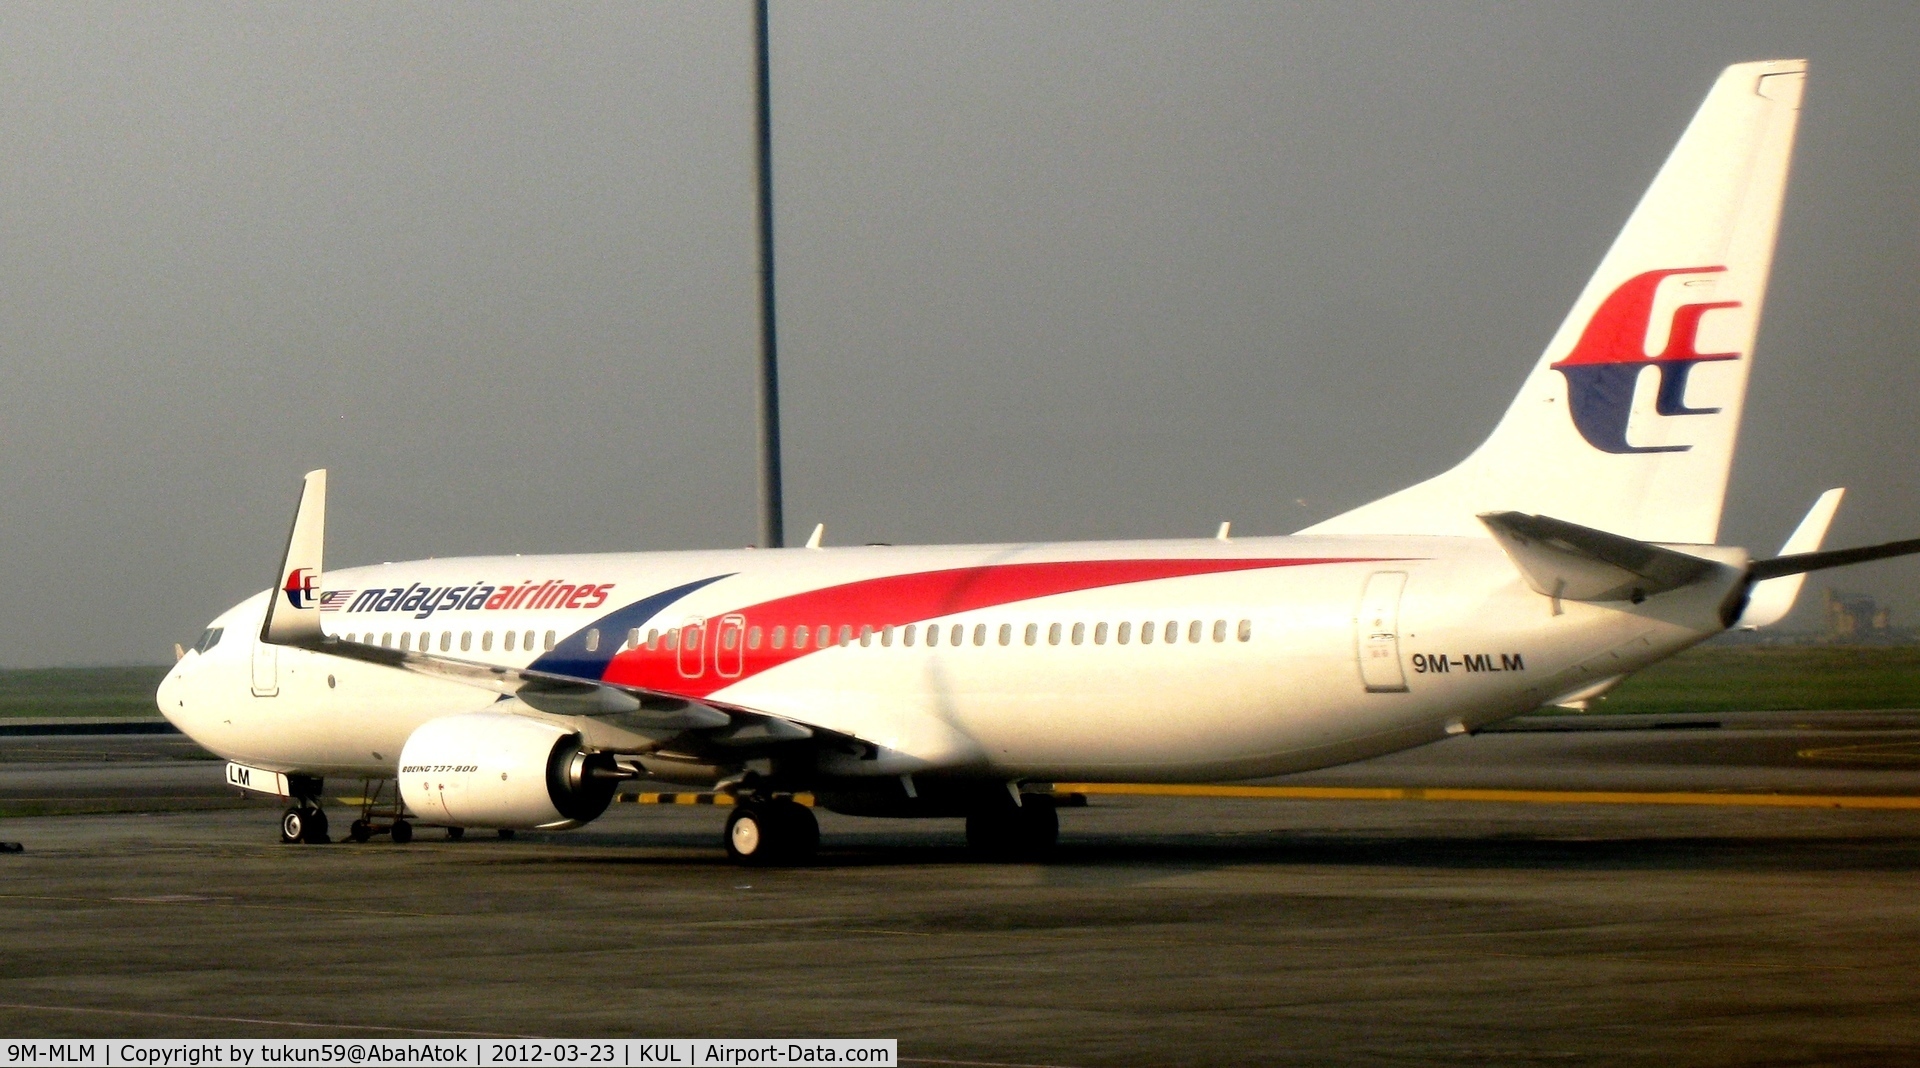 9M-MLM, 2011 Boeing 737-8H6 C/N 39323, Malaysia Airlines